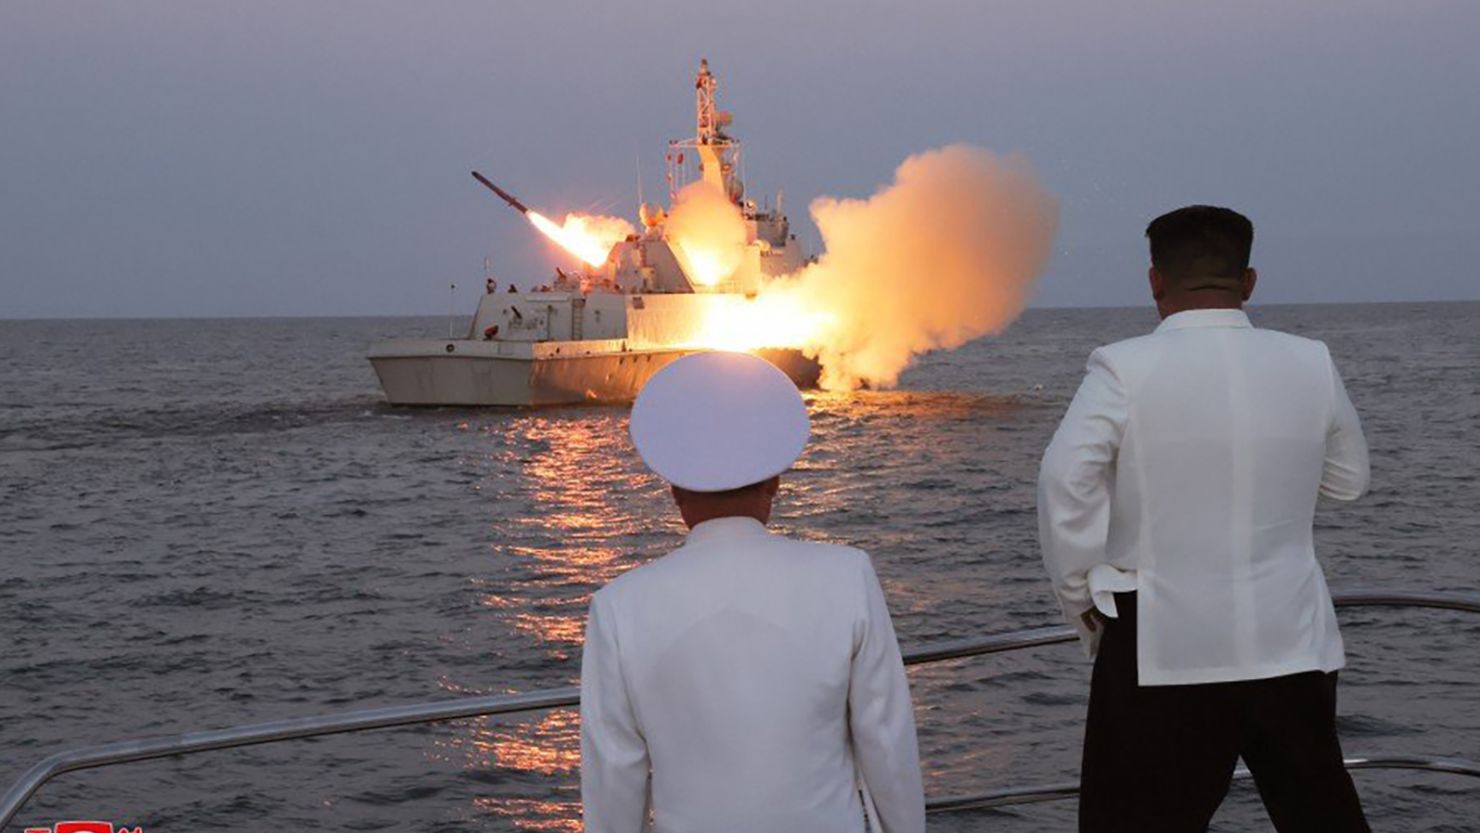 North Korean leader Kim Jong Un watches the test of a cruise missile from a patrol ship.